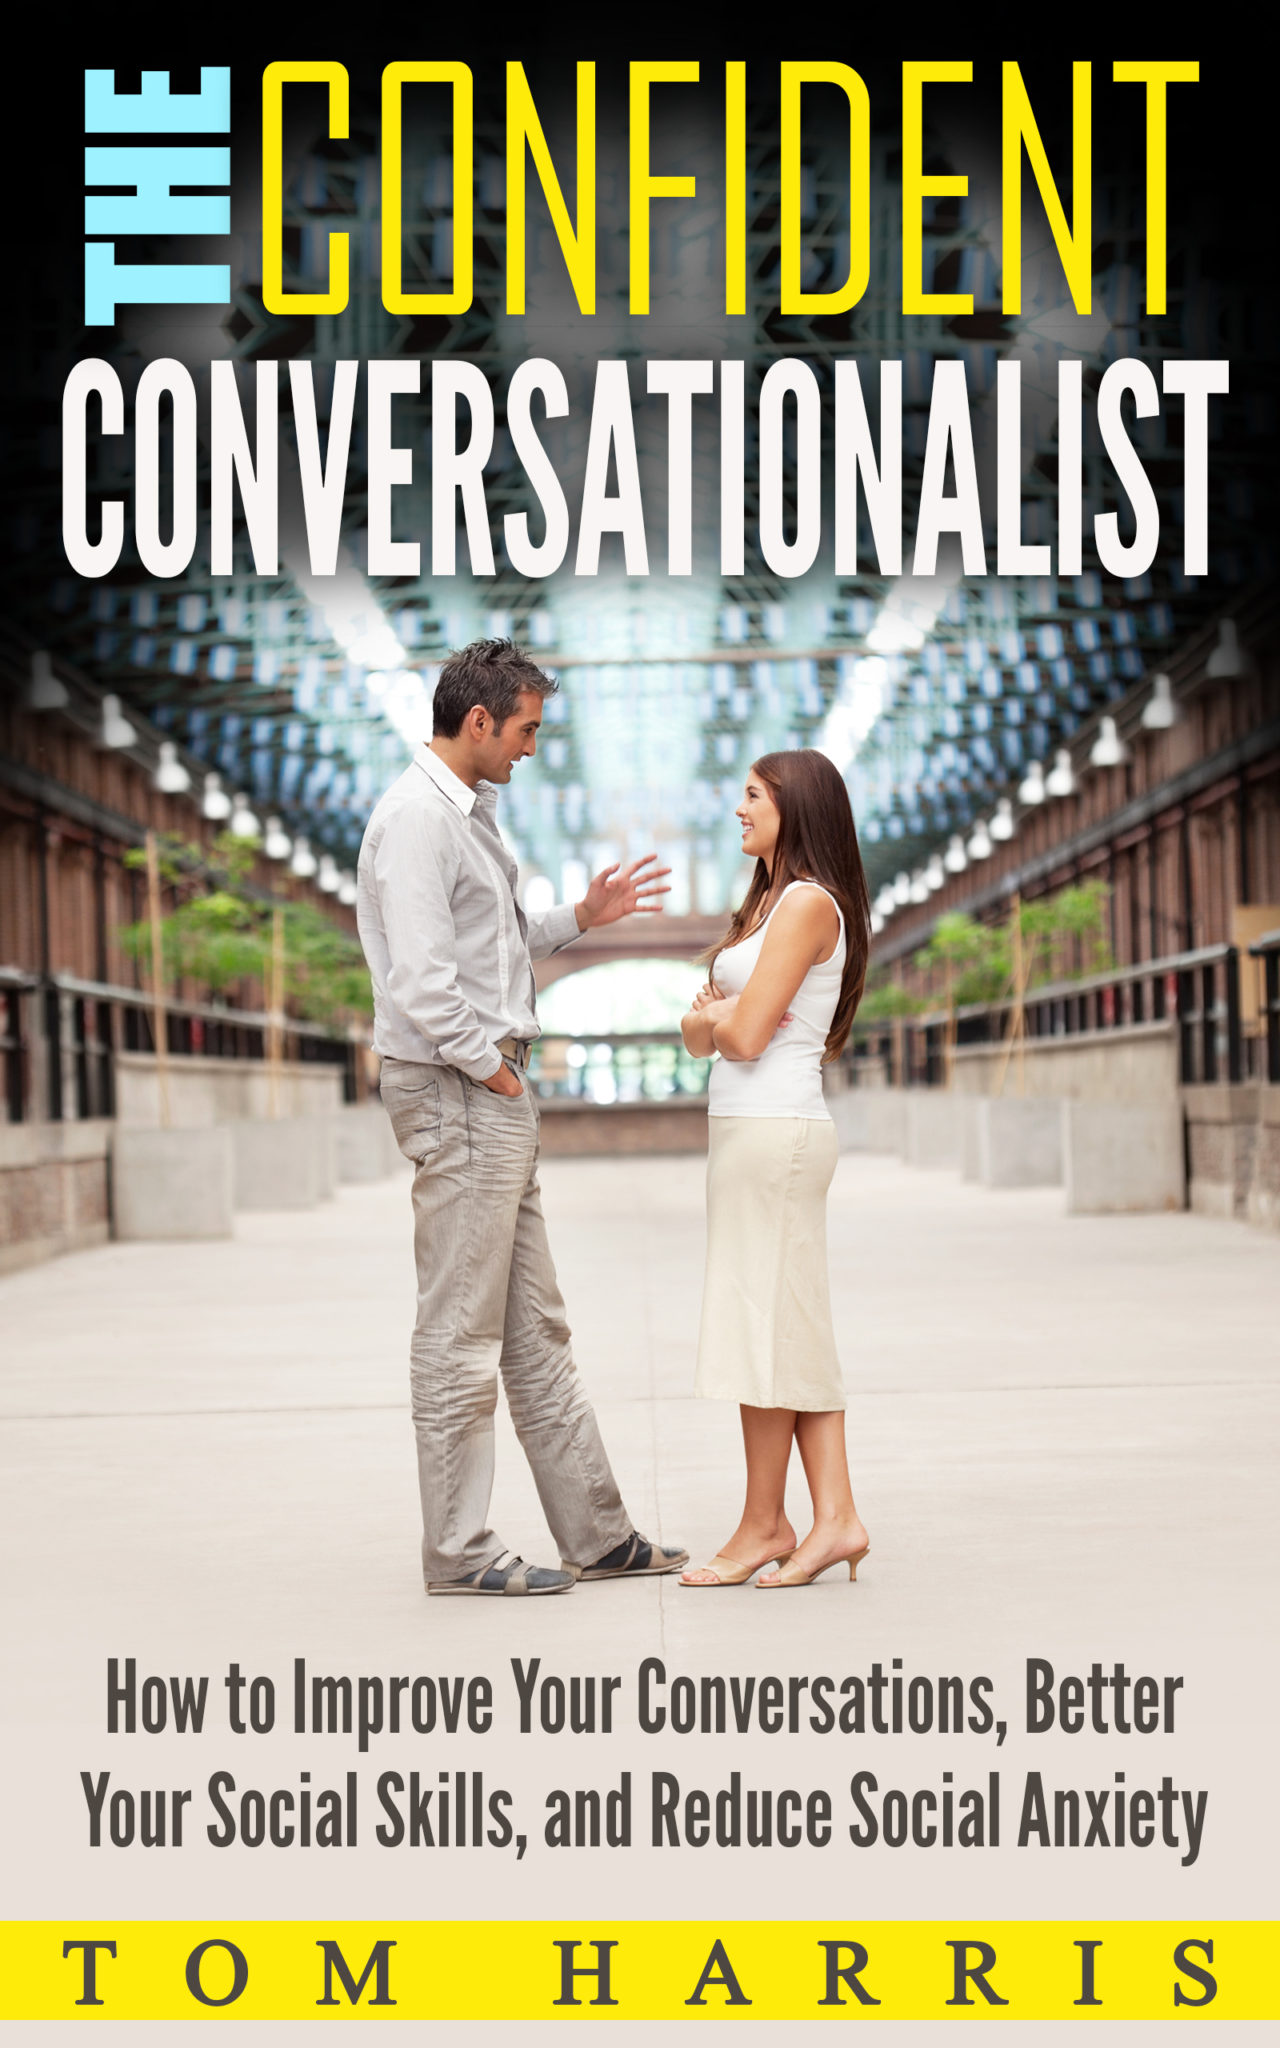 FREE: The Confident Conversationalist: How to Improve Your Conversations, Better Your Social Skills, and Reduce Social Anxiety by Tom Harris